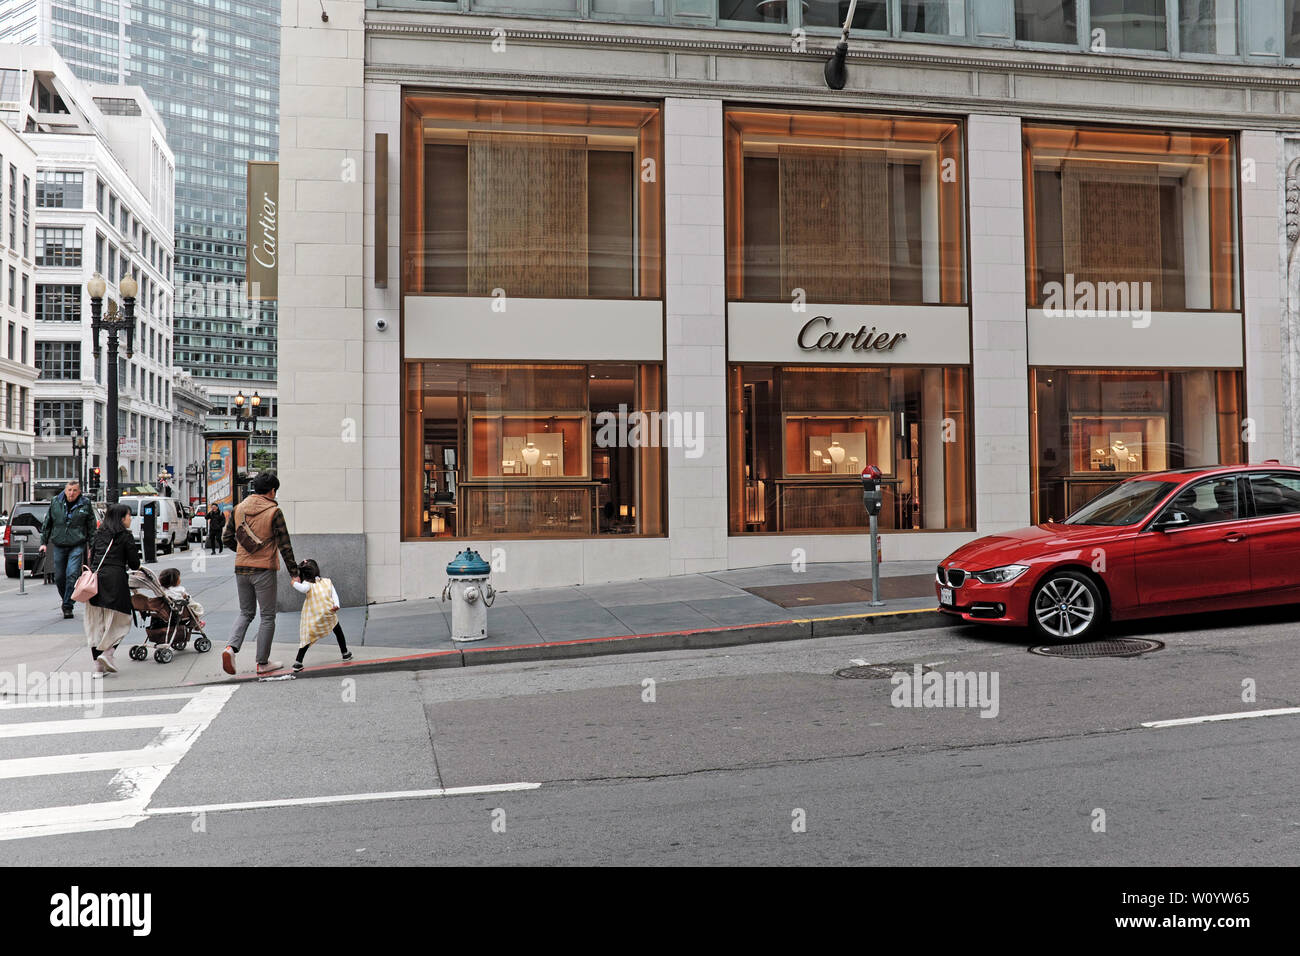 Cartier, the upscale retailer specializing in jewelry, on Grant Avenue in San Francisco, California, USA. Stock Photo